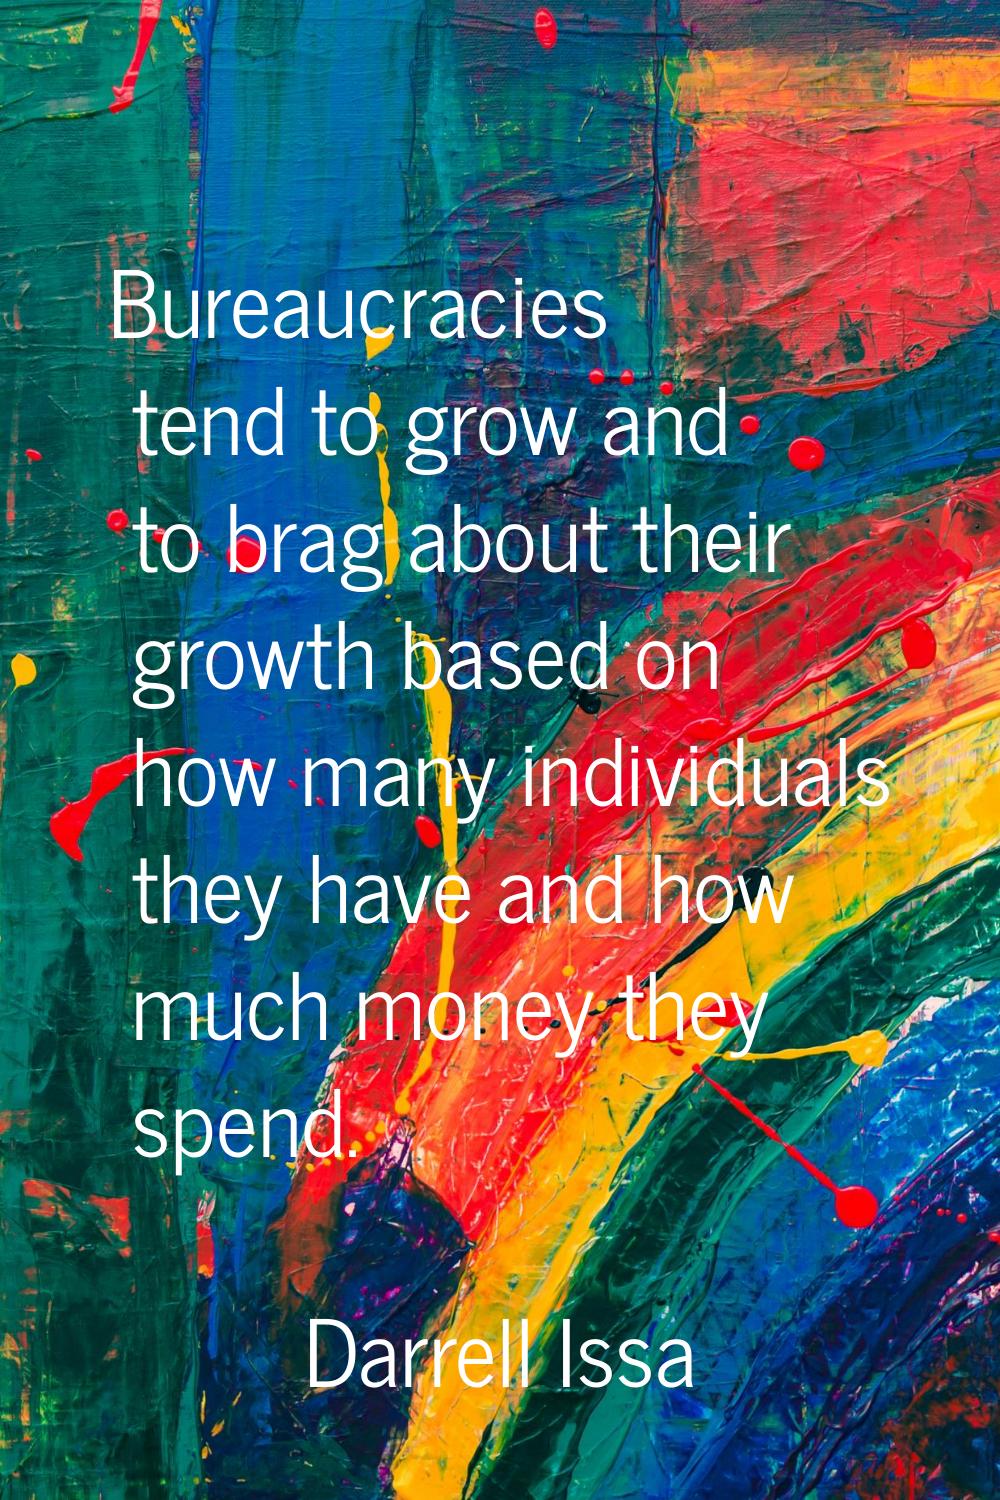 Bureaucracies tend to grow and to brag about their growth based on how many individuals they have a